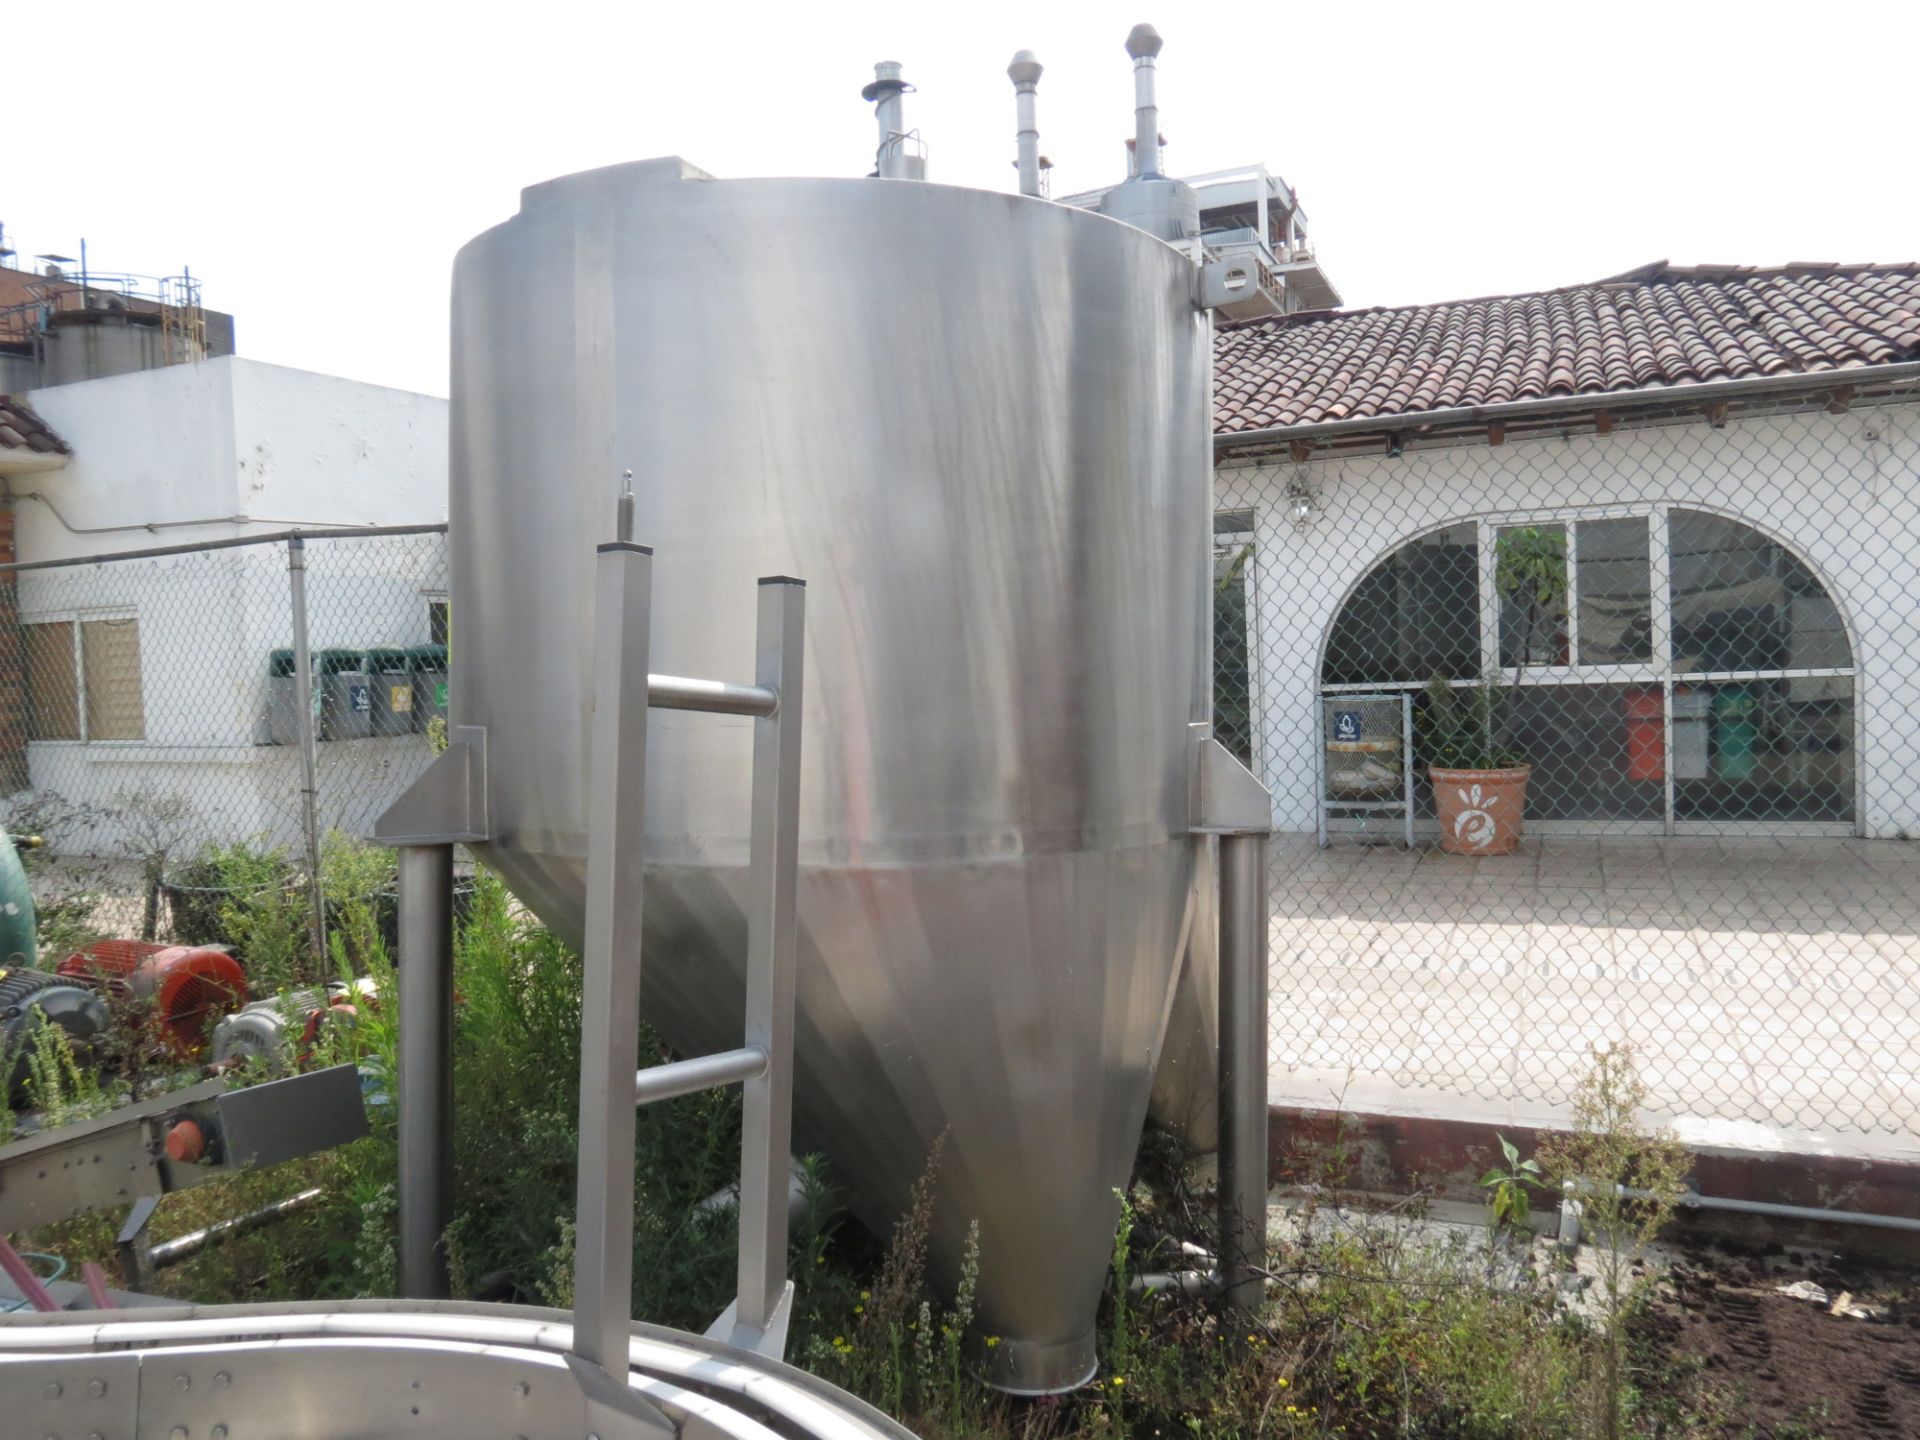 Stainless Steel Tank of 1.93 m in diameter, Includes Strong Parts conveyor belt. - Image 6 of 8